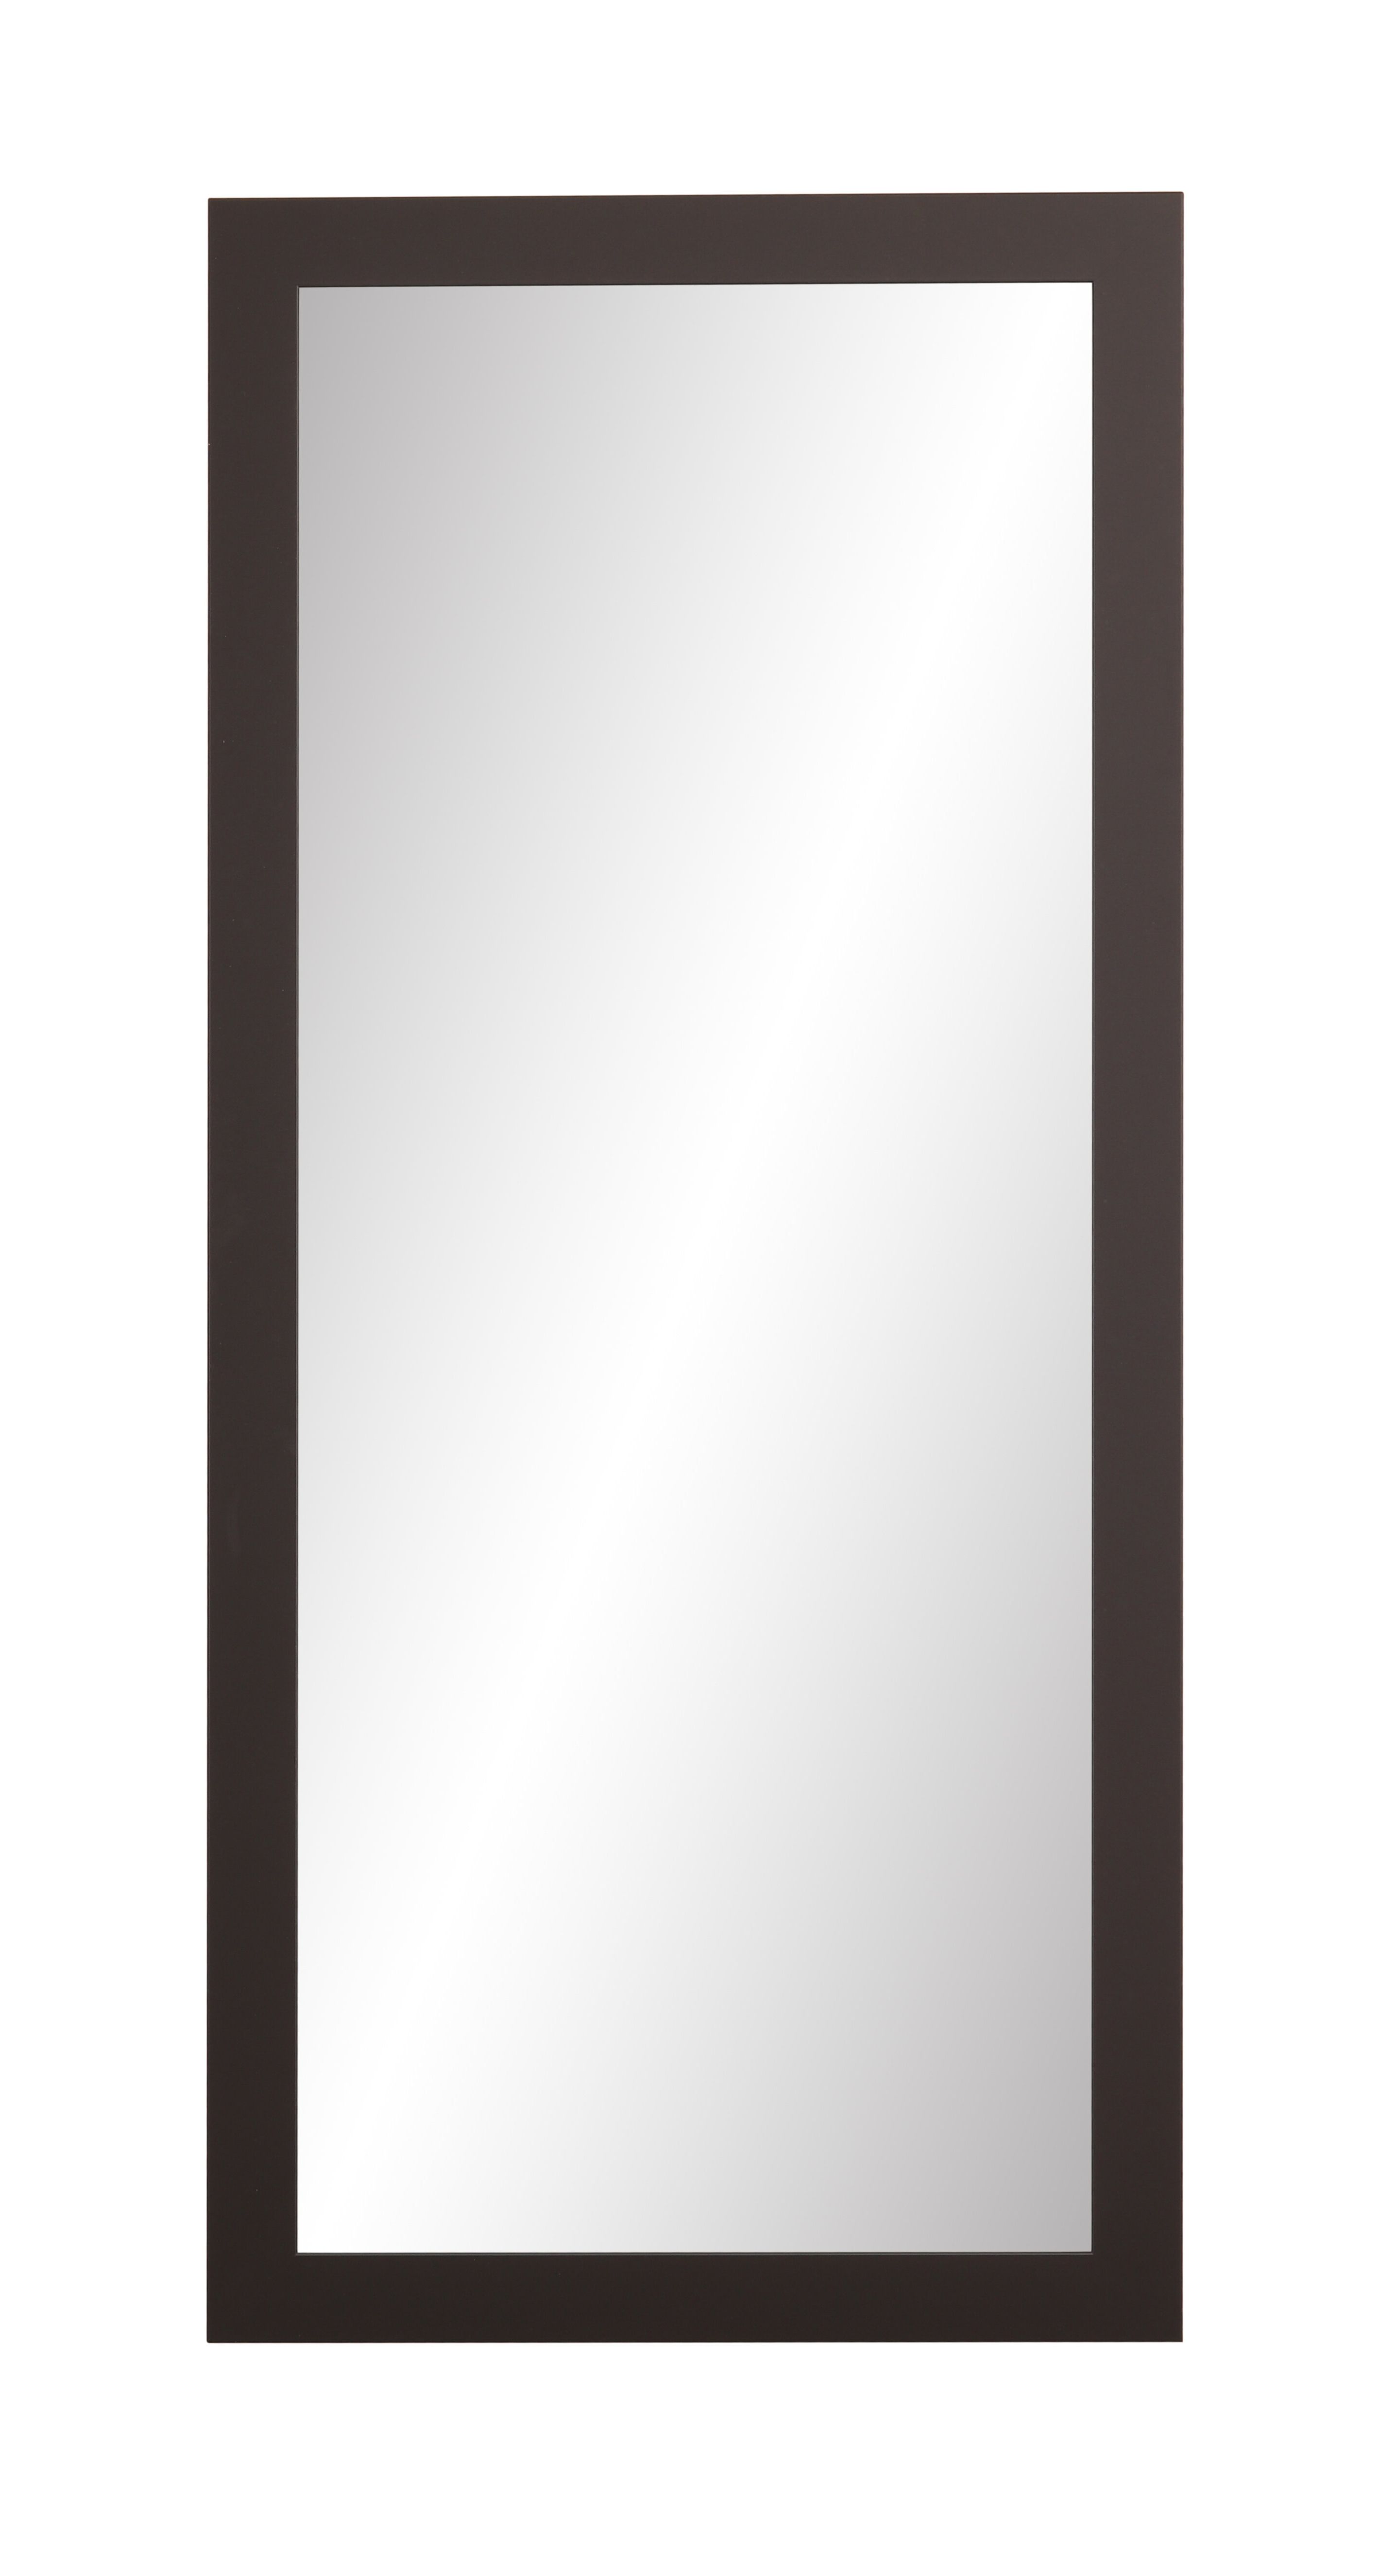 Trendy Jameson Modern & Contemporary Full Length Mirror Intended For Jameson Modern & Contemporary Full Length Mirrors (View 1 of 20)